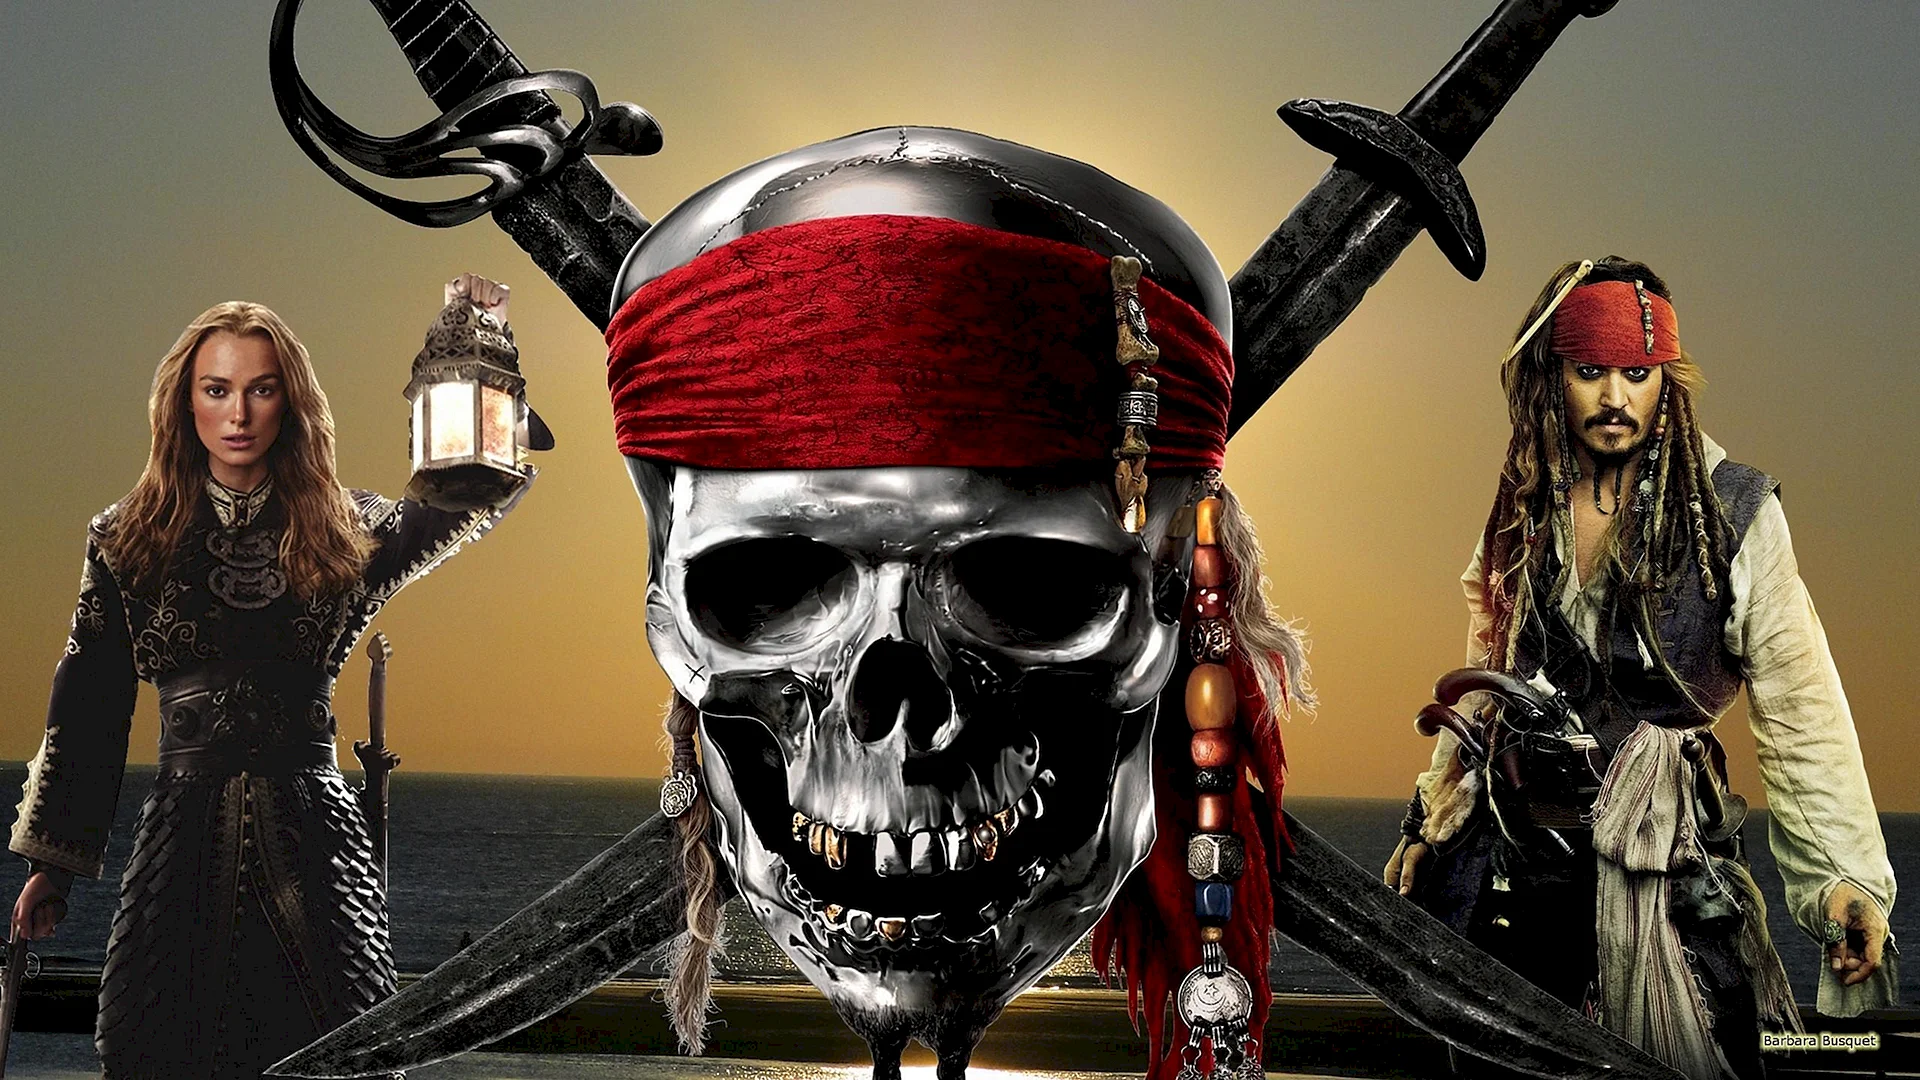 Pirates of the Caribbean Wallpaper